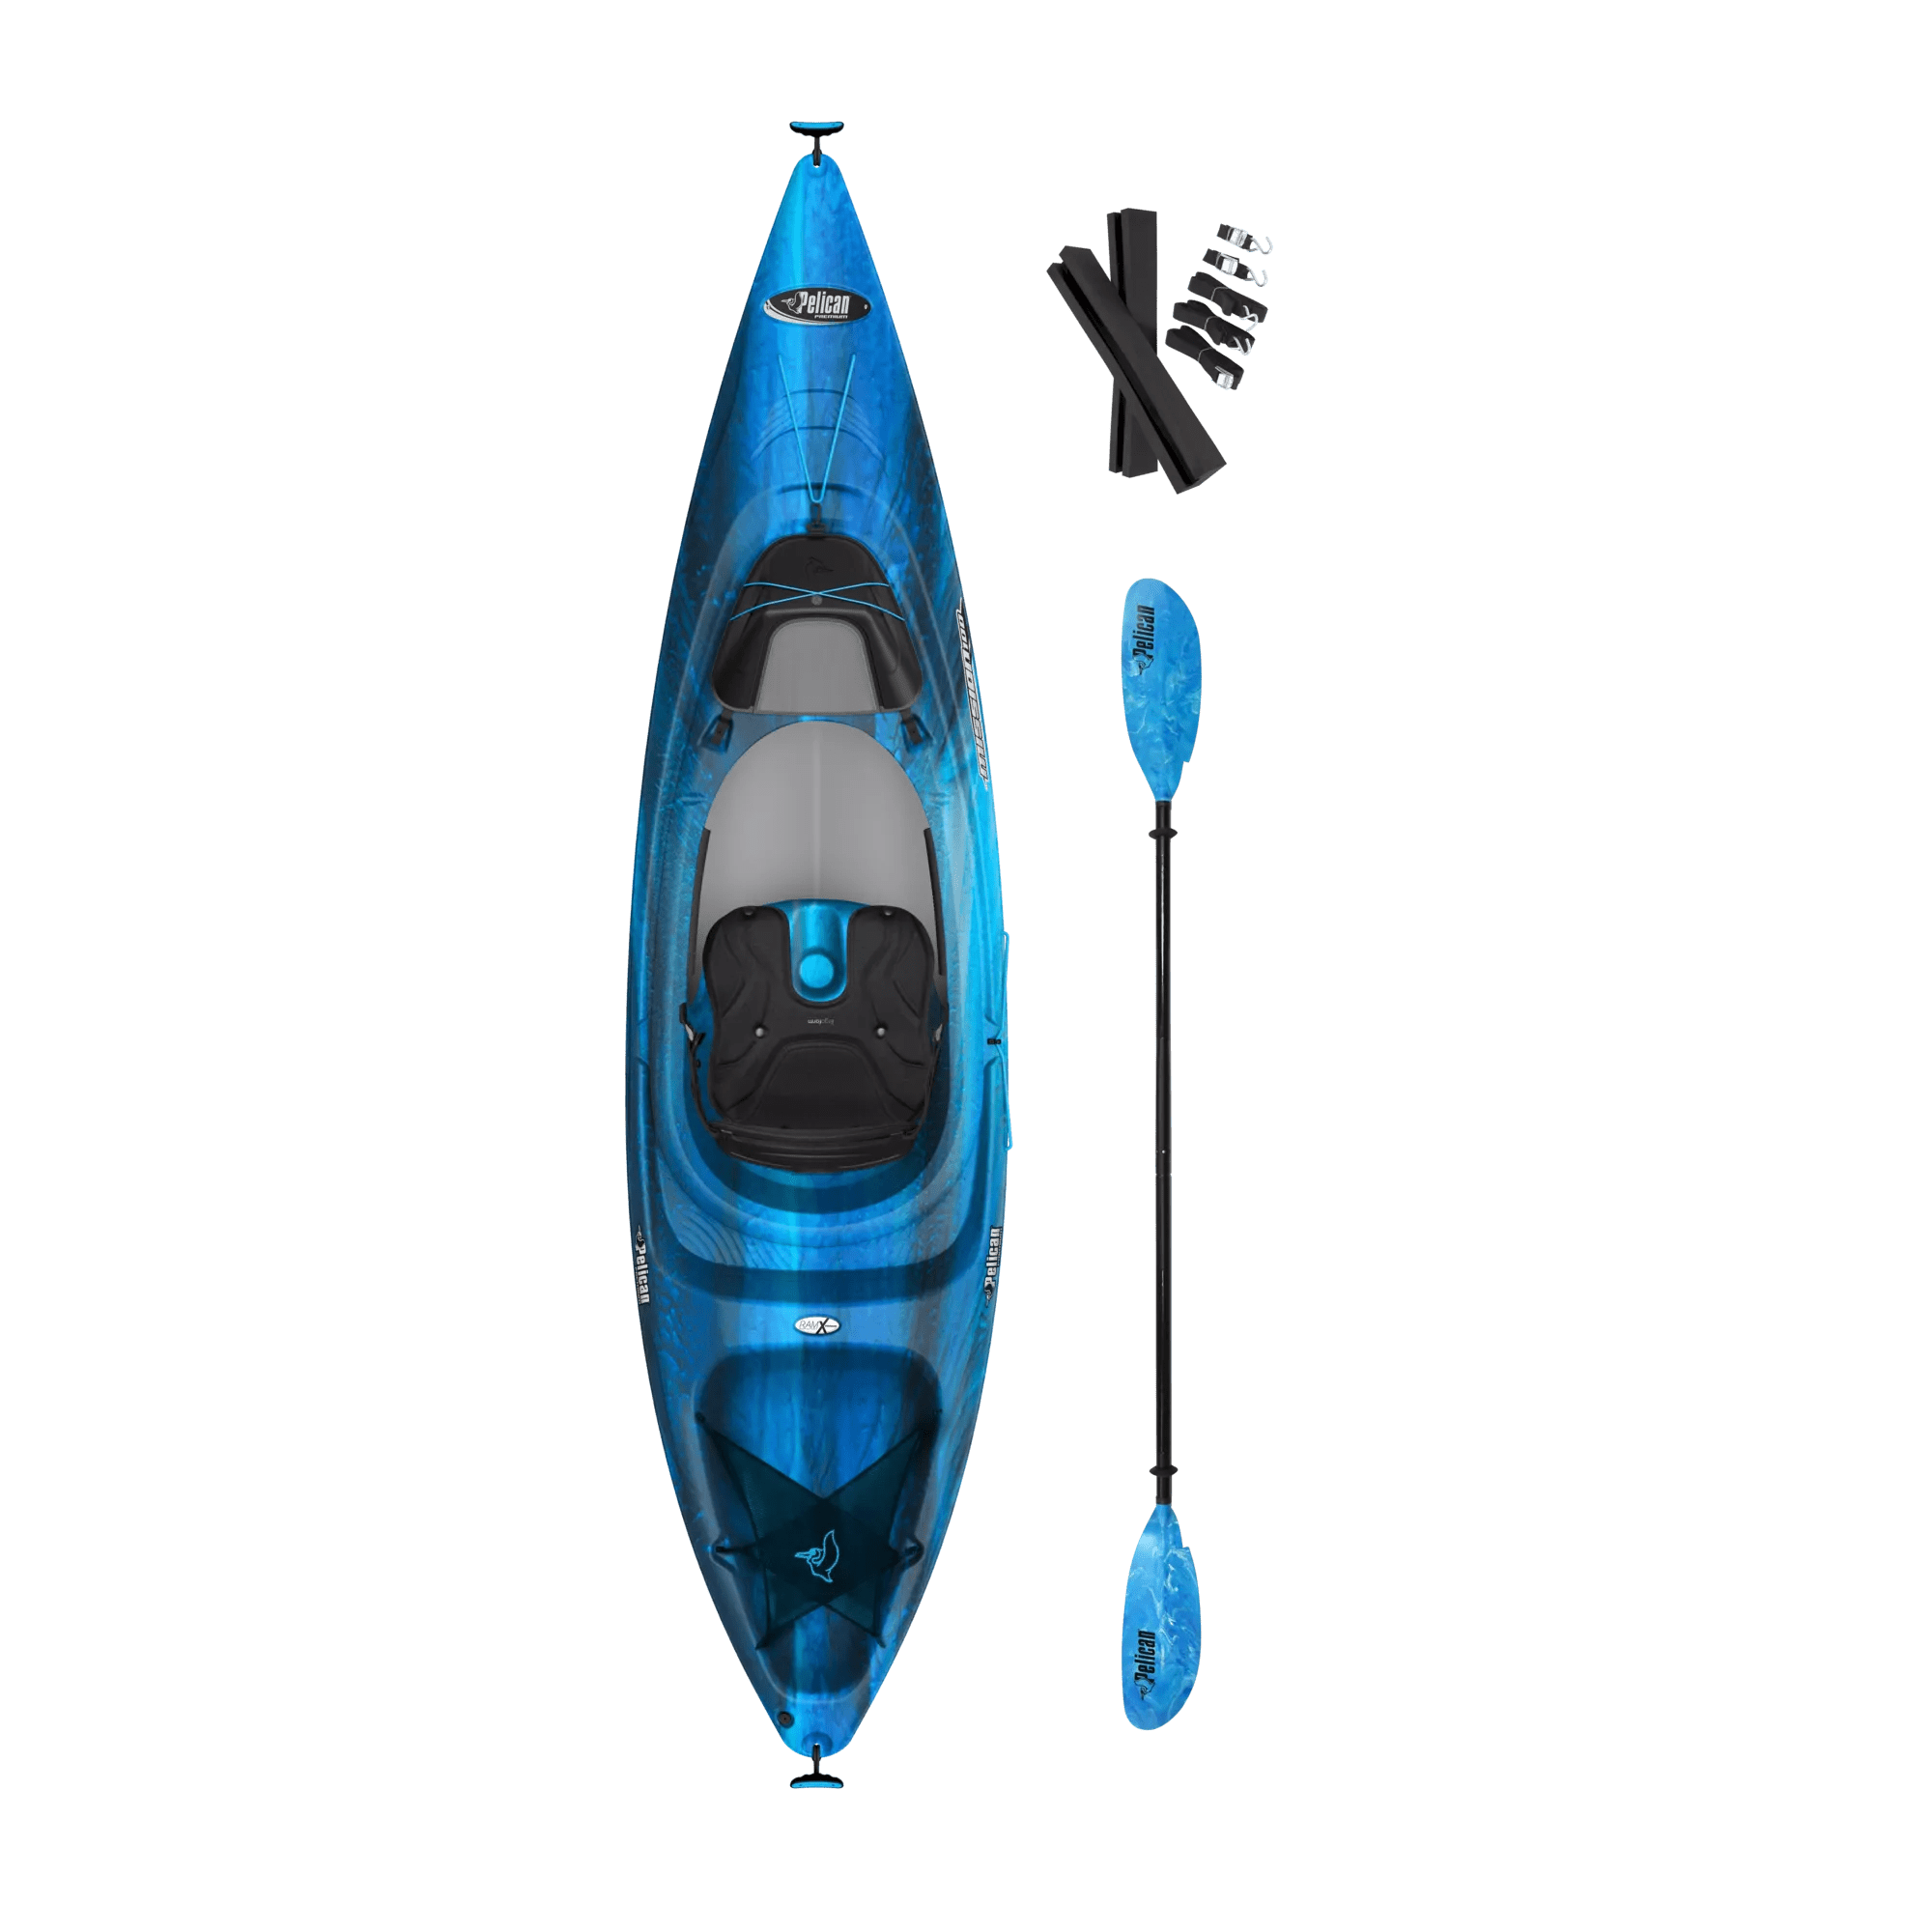 PELICAN - Mission 100 Kayak with Paddle - Blue - KAP10P100-00 - TOP